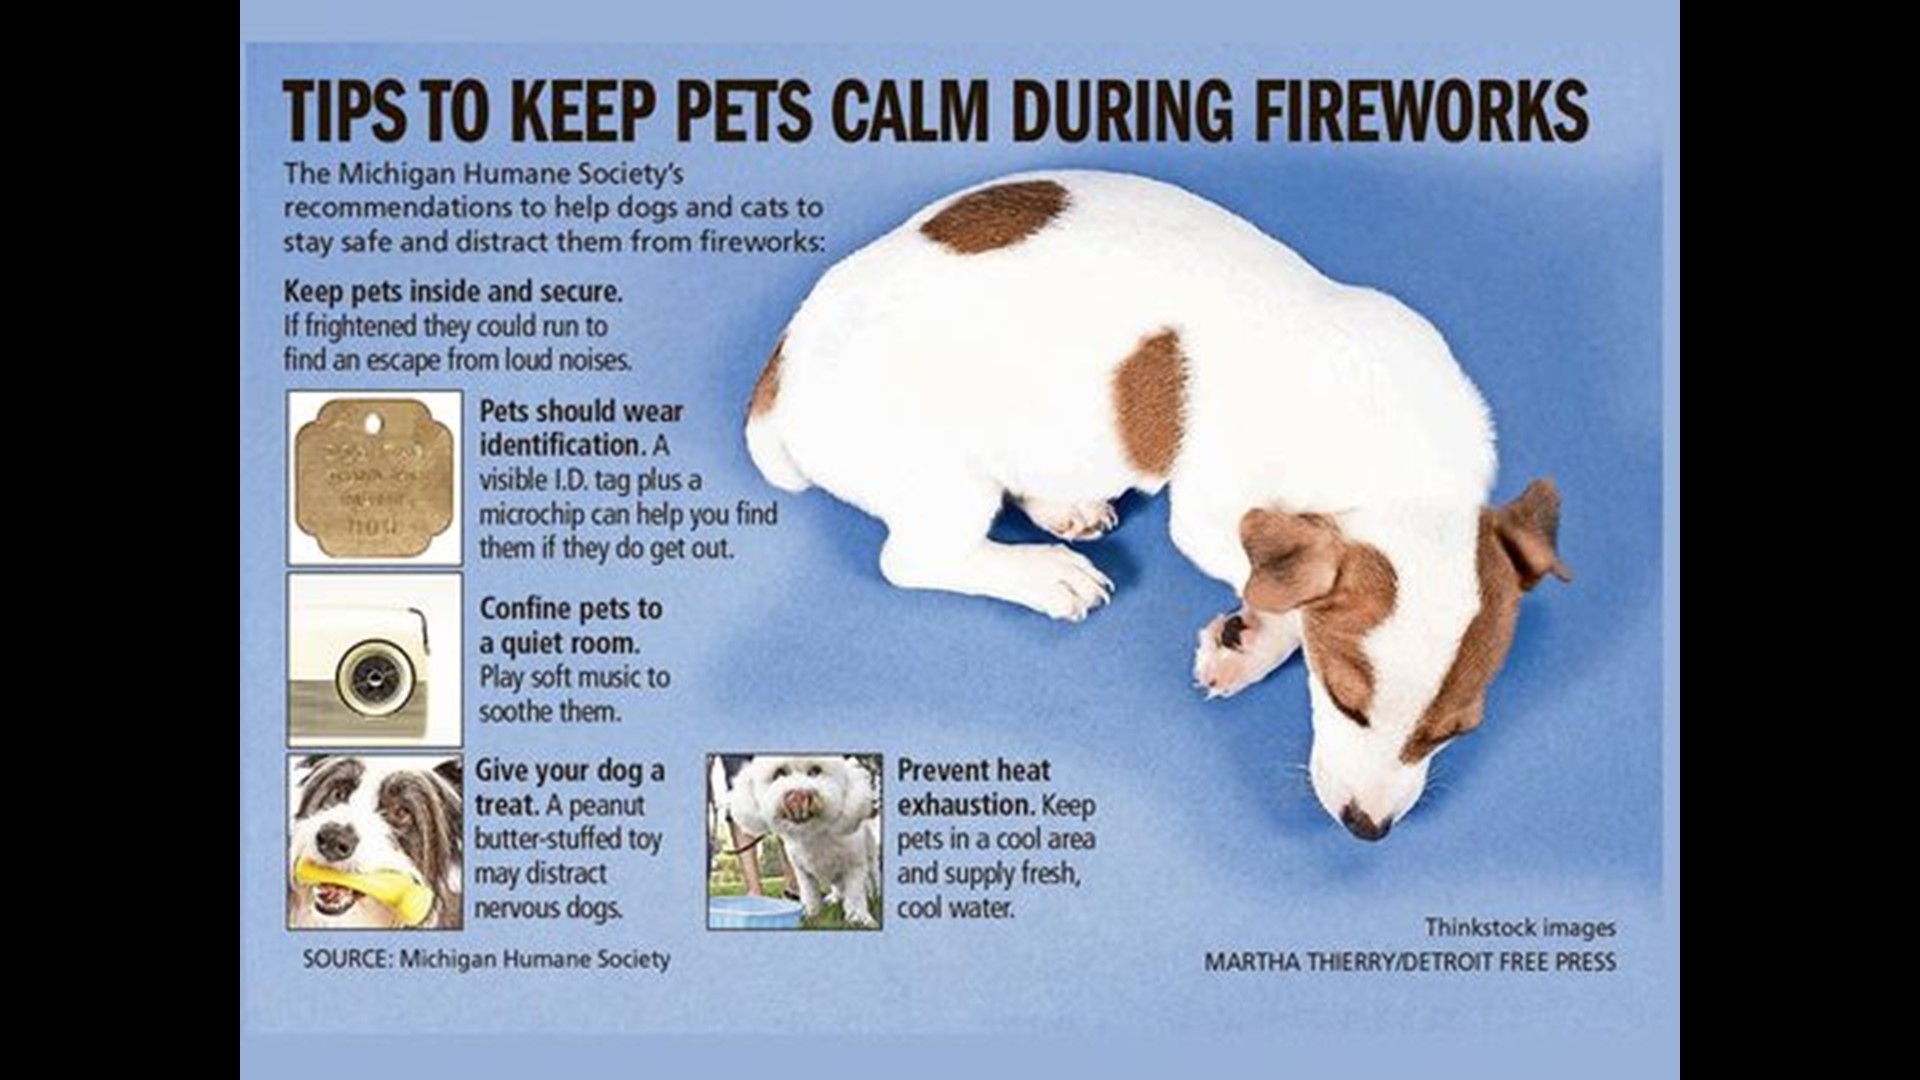 The Fourth of July is just around the corner and those loud firework shows can frighten pets. Dr. Laura  Saunders from Firehouse Animal Health Center stopped by KVUE to share some tips on how to comfort your pets during firework shows.